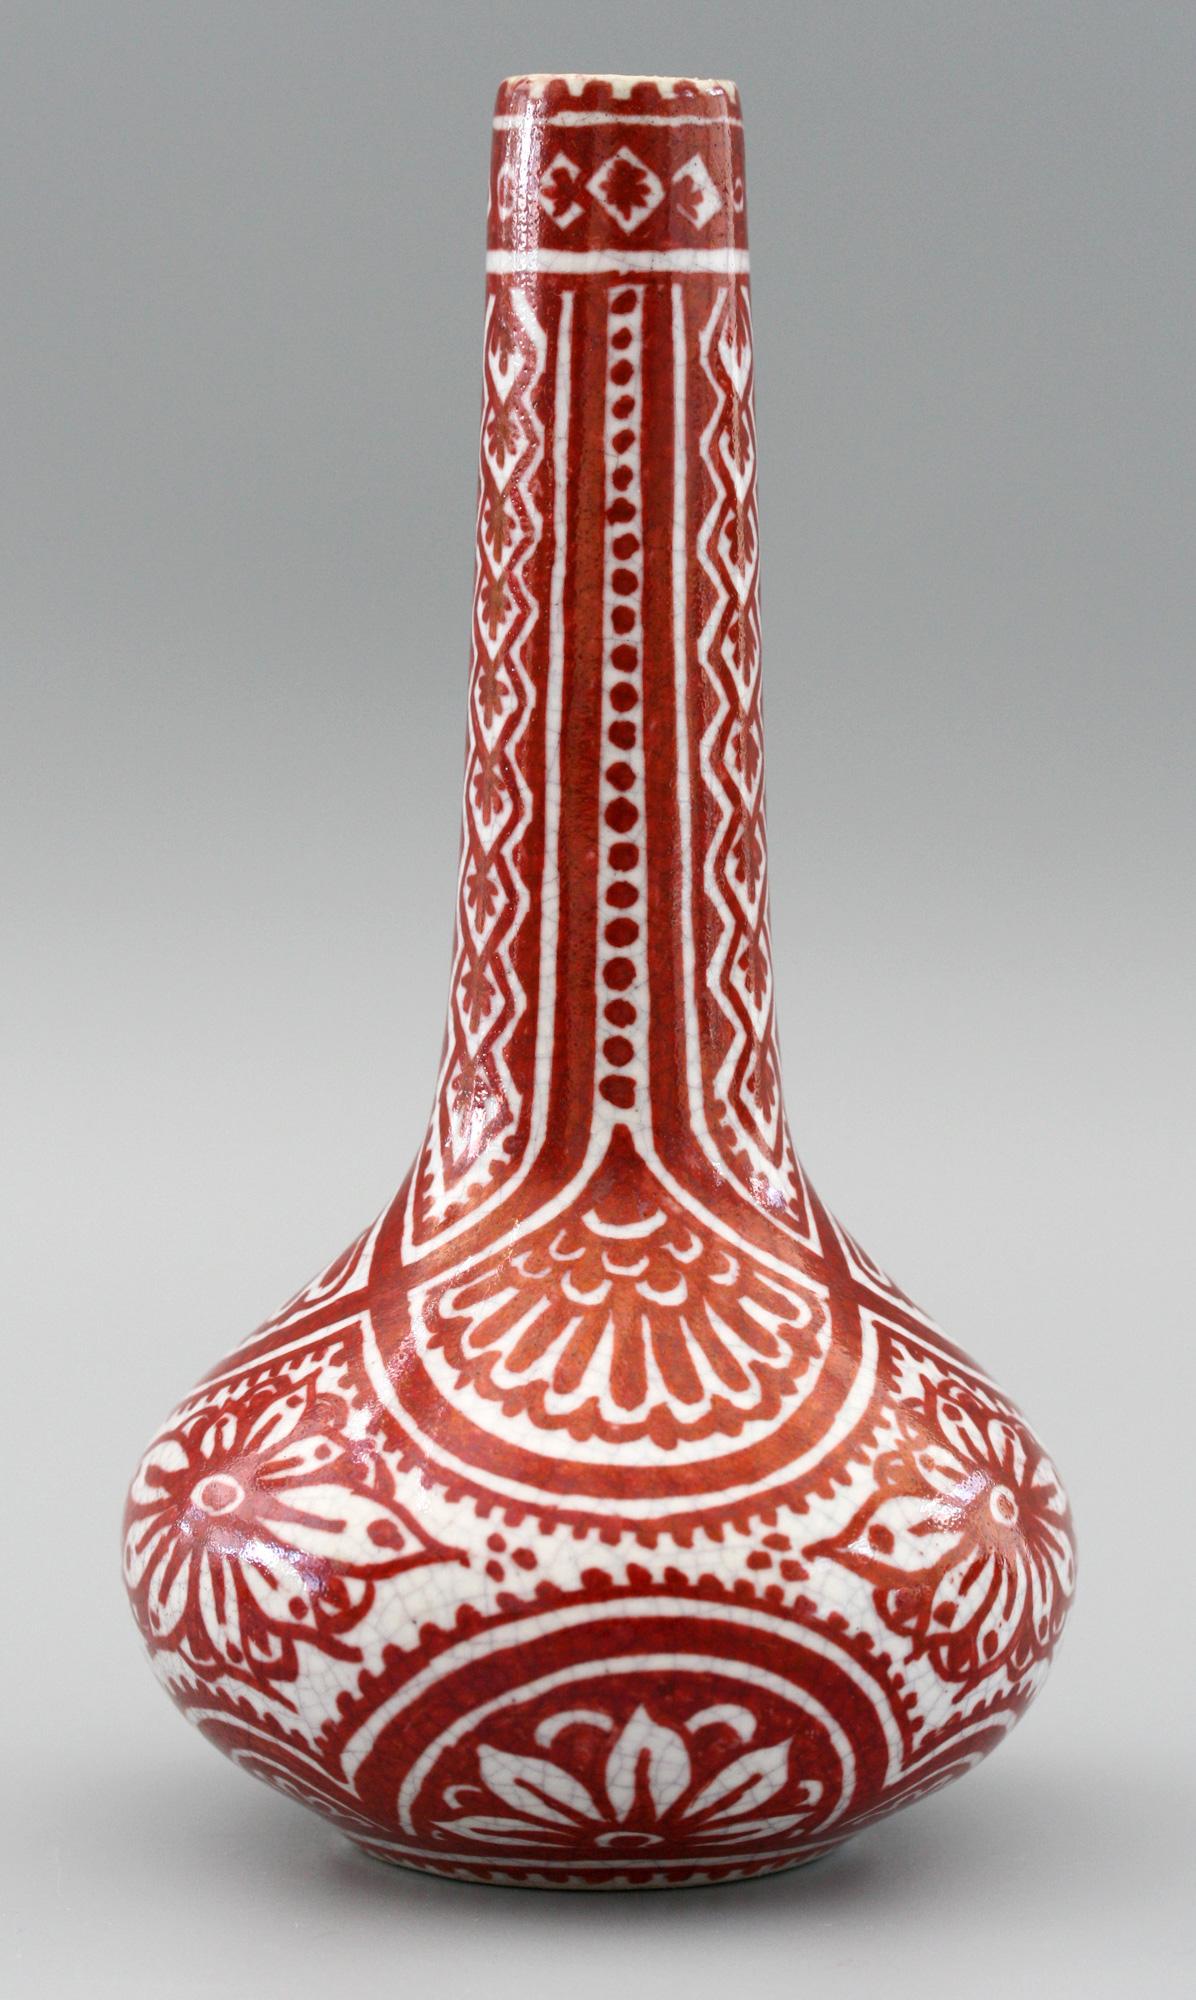 A stunning vintage Dutch delft art pottery vase decorated in red on a craquele ground by the renowned pottery De Porcelyne Fles and dating from circa 1947. The bottle shaped vase has a rounded onion shaped base with a narrow rounded foot rim and